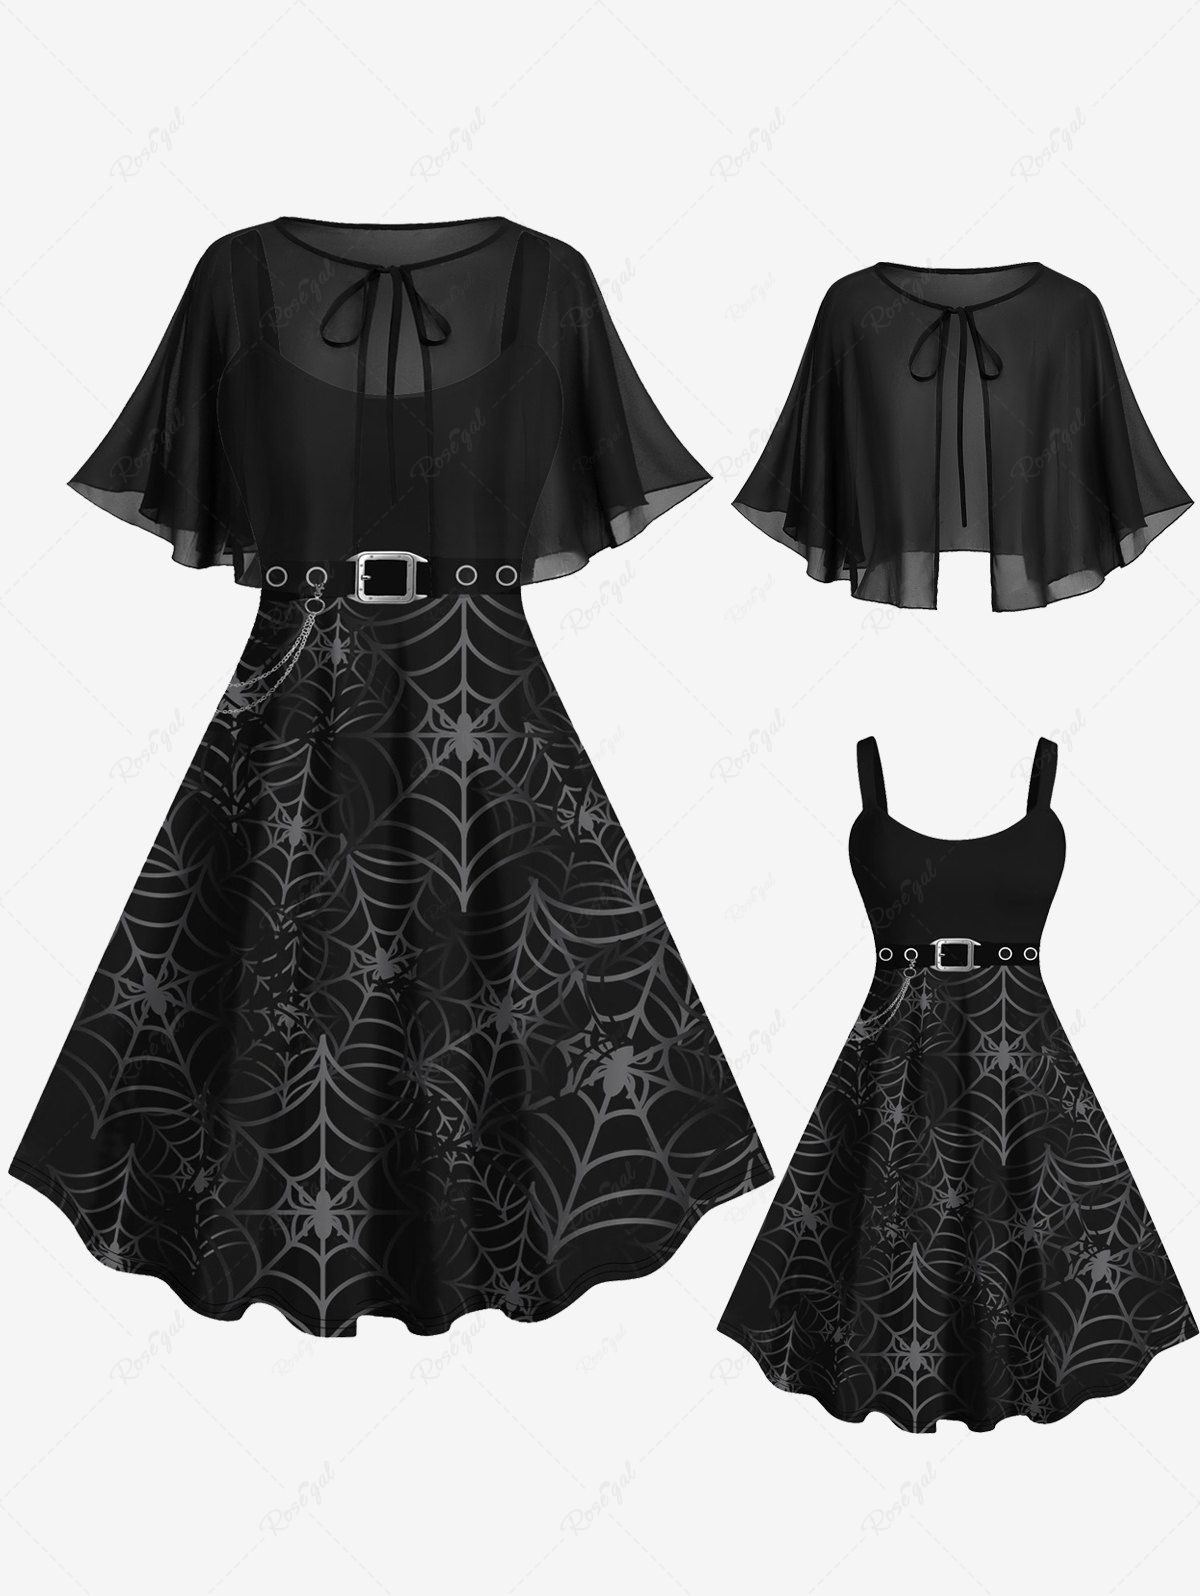 Trendy Halloween Spider Web Grommets Buckle Chain 3d Printed Tank Dress and Sheer Mesh Tied Cape Plus Size Outfit  